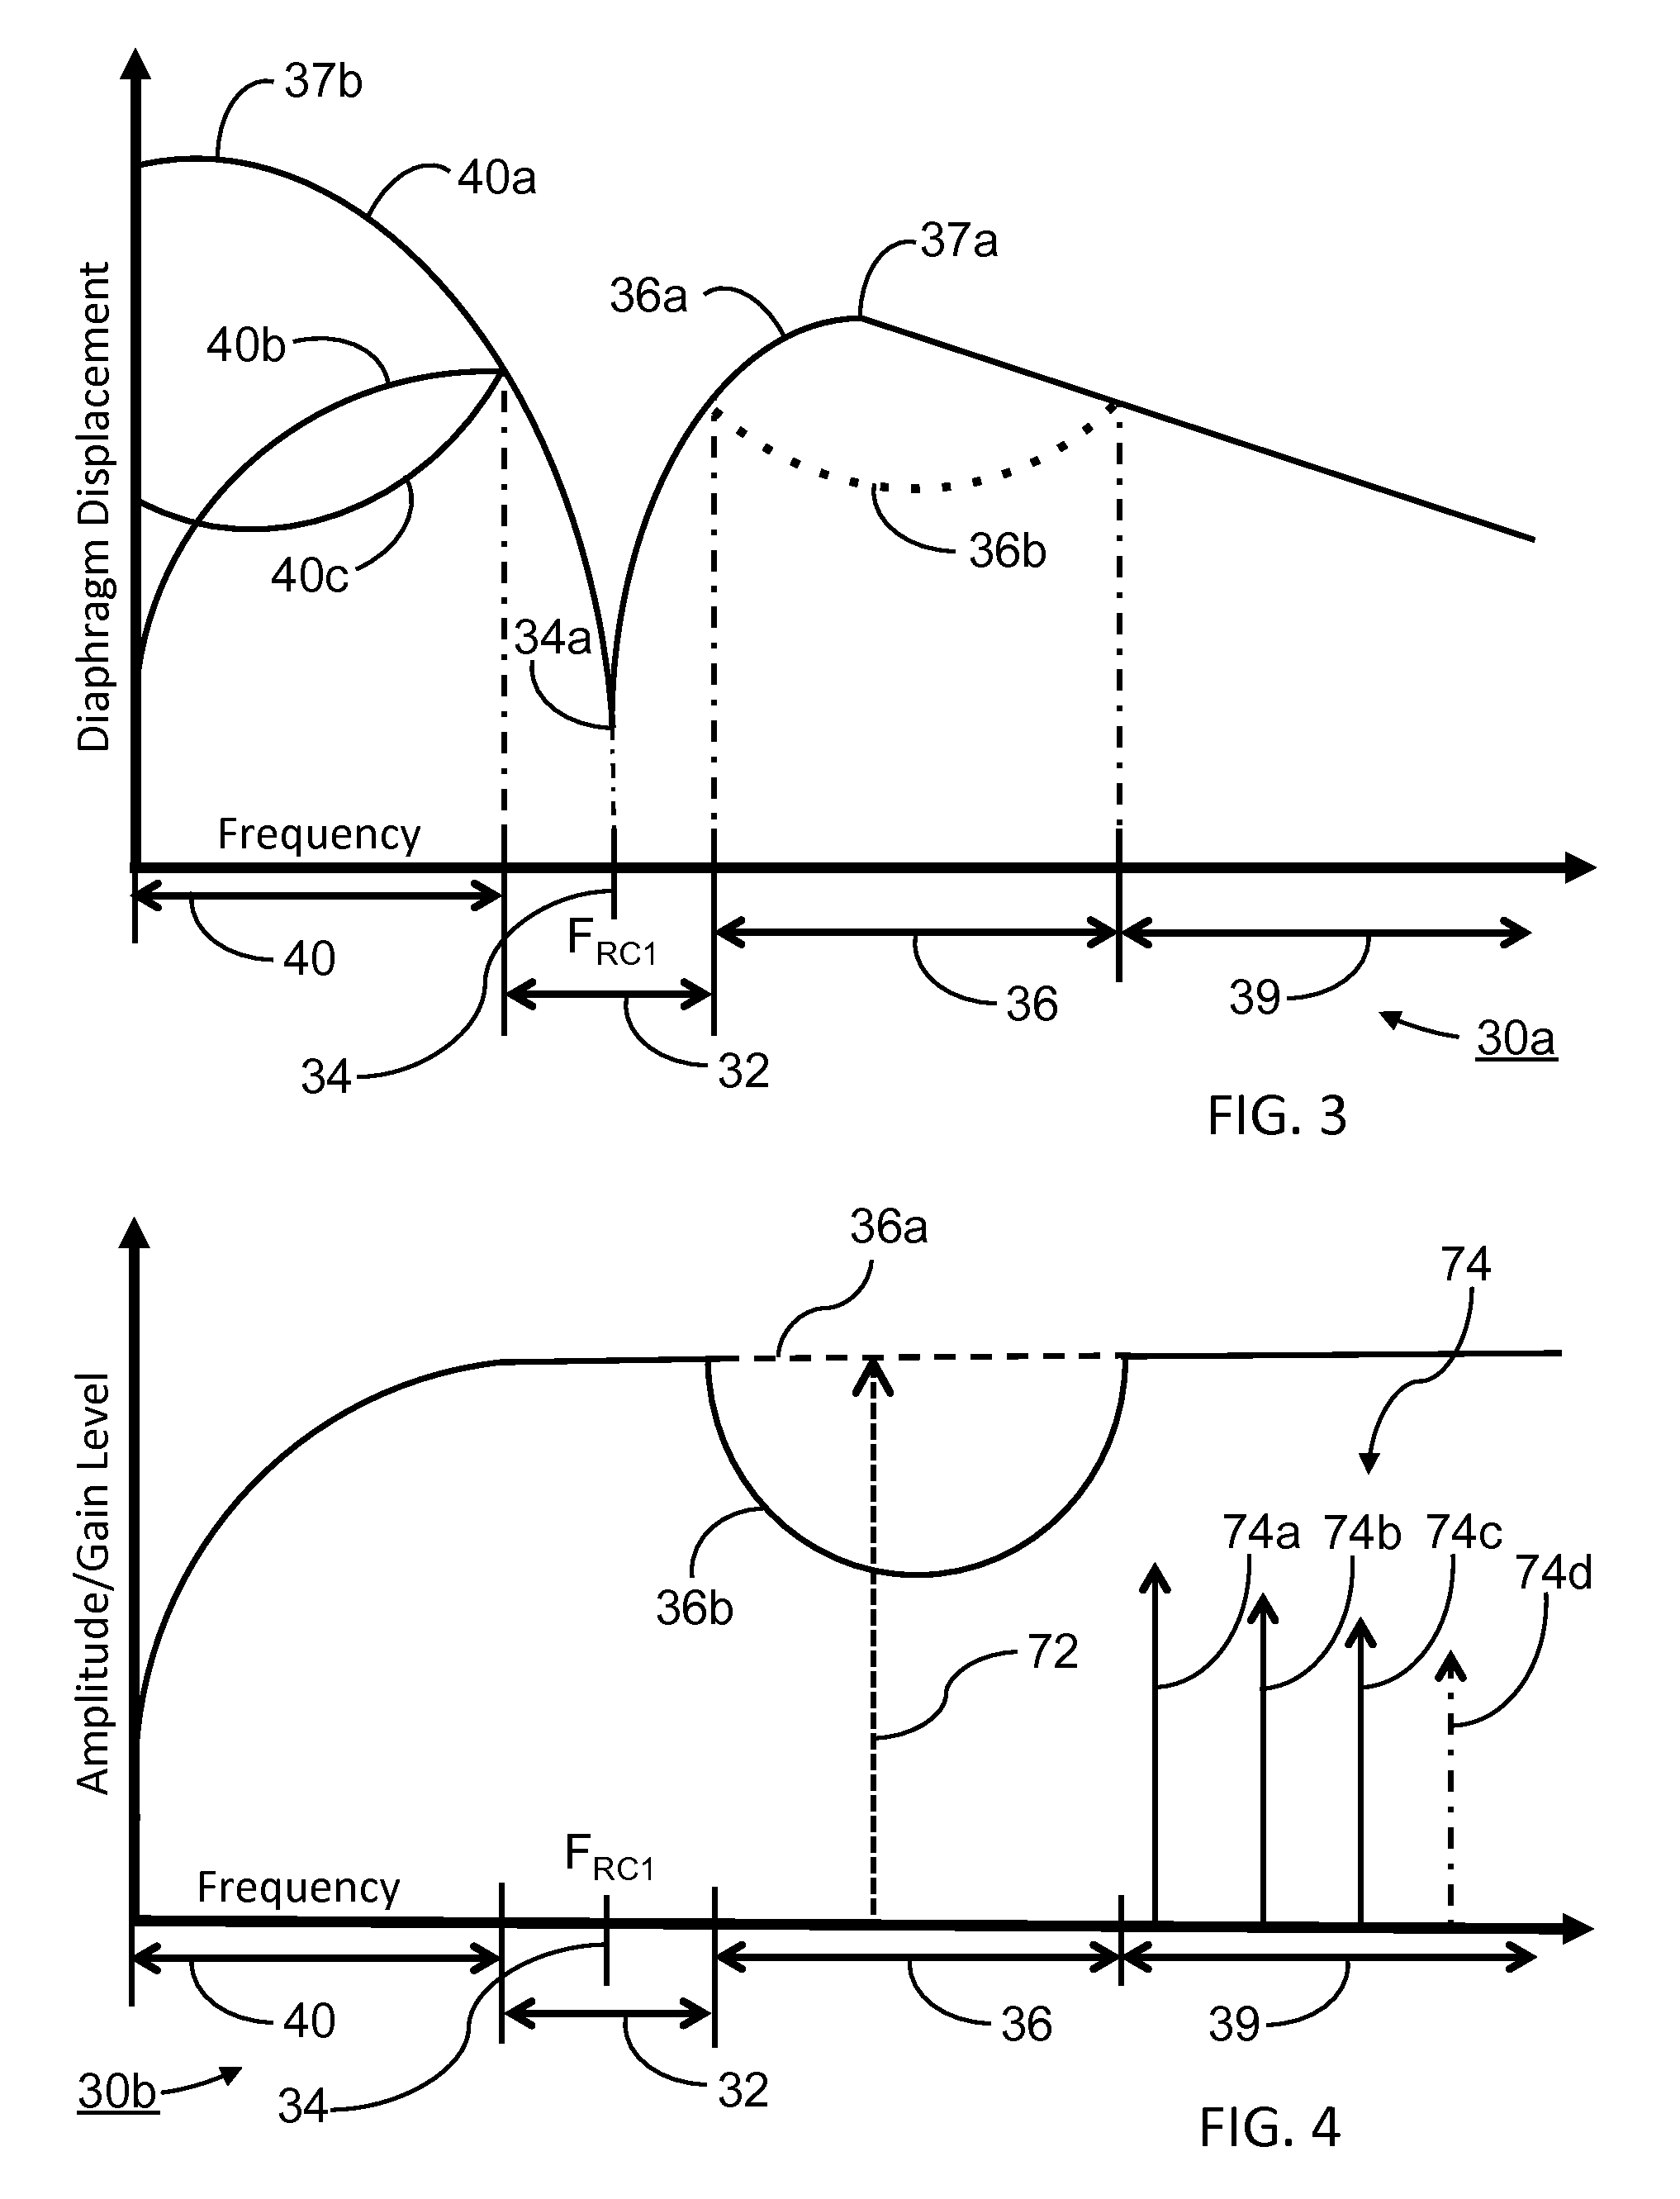 Loudspeaker enclosure system with signal processor for enhanced perception of low frequency output